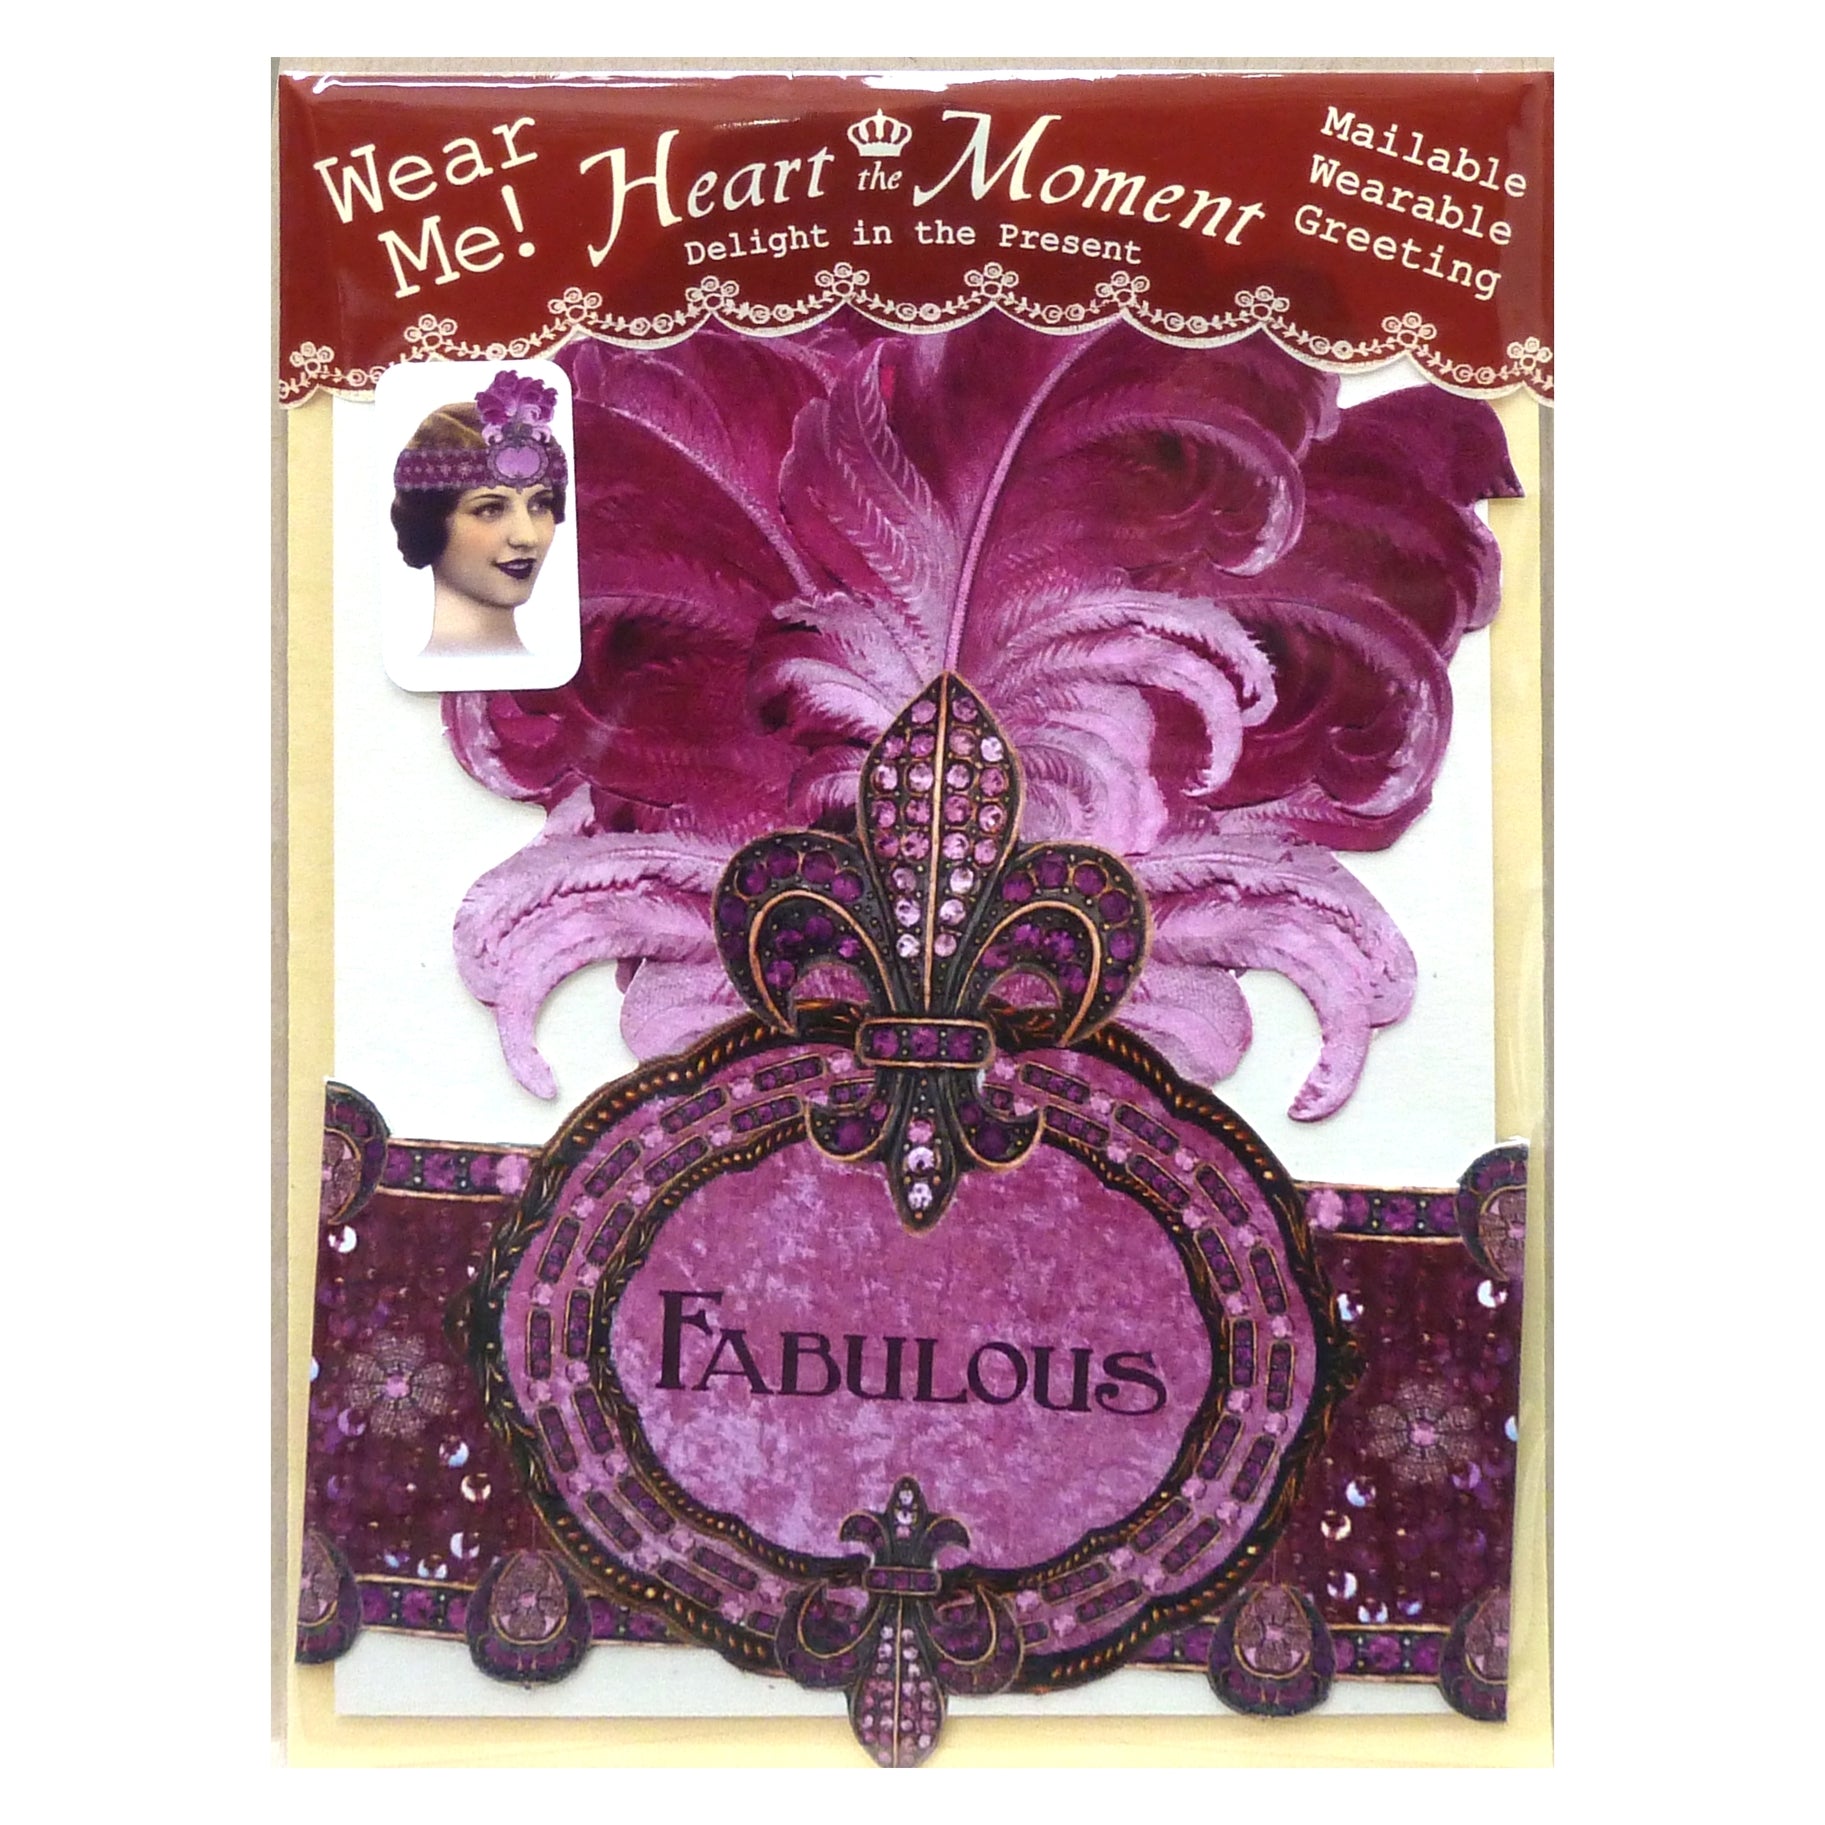 Fabulous Greeting Card with Tiara | Vintage Design | Feathers